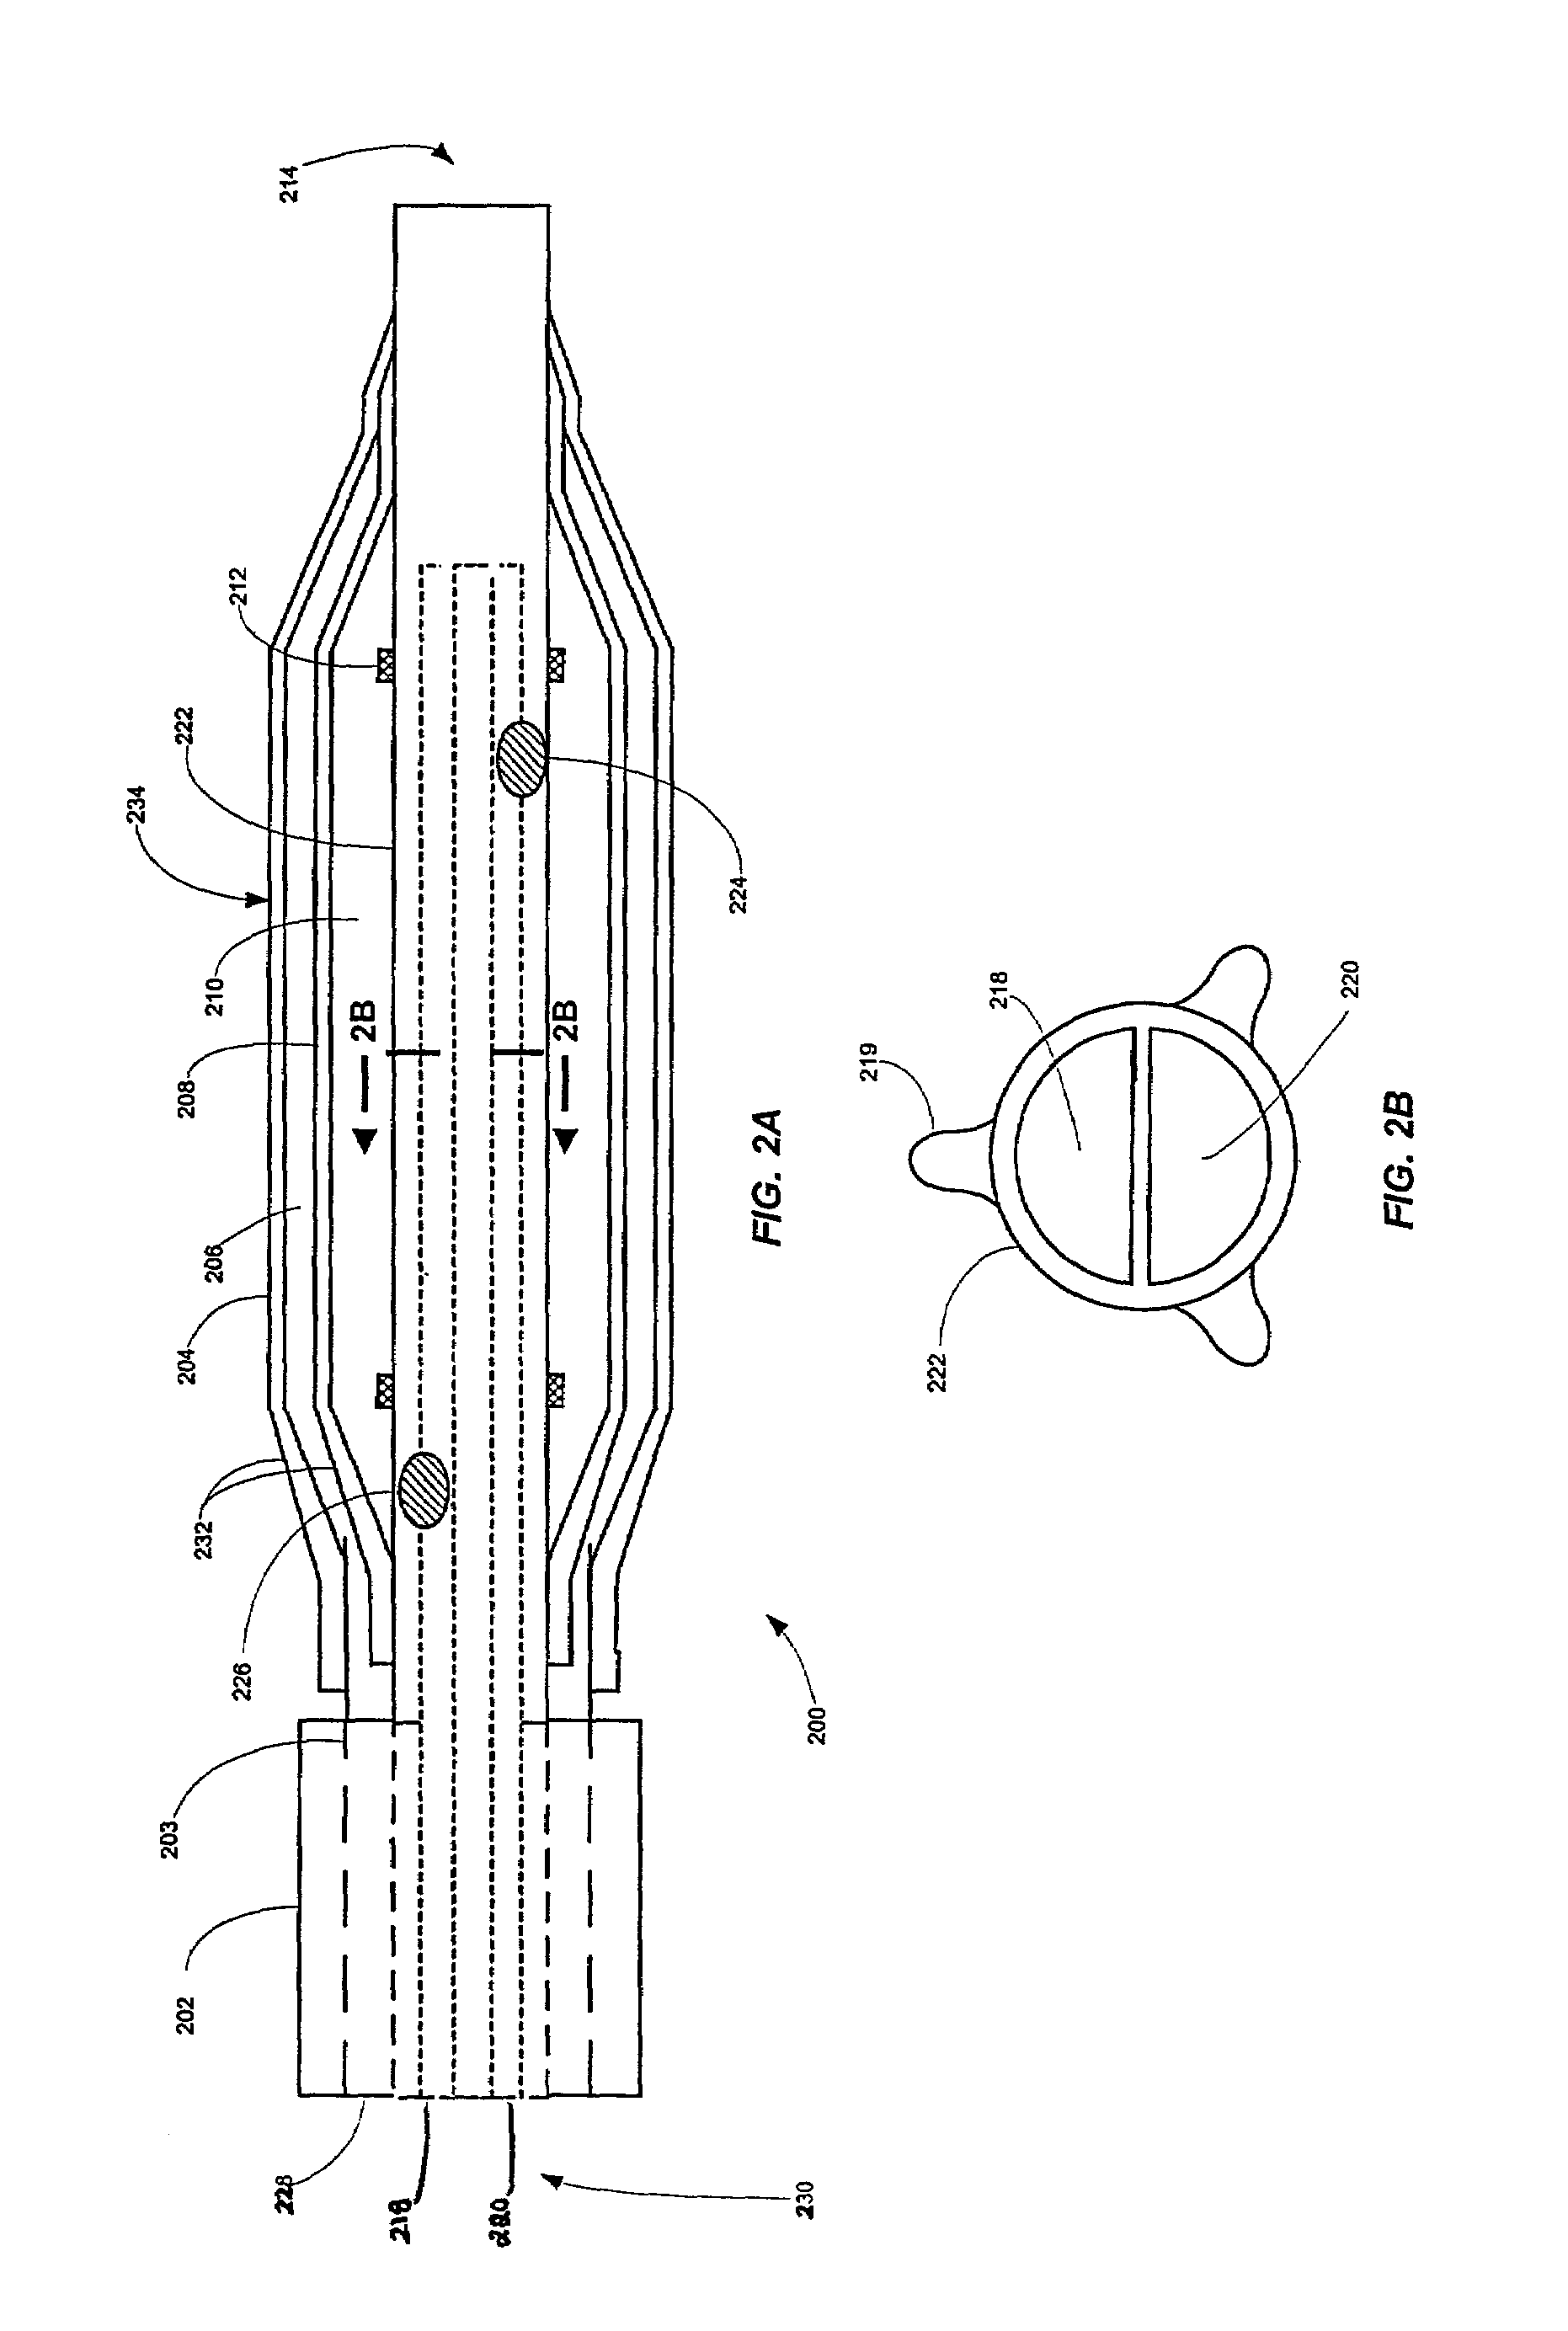 Method and device for performing cooling- or cryo-therapies for, e.g., angioplasty with reduced restenosis or pulmonary vein cell necrosis to inhibit atrial fibrillation